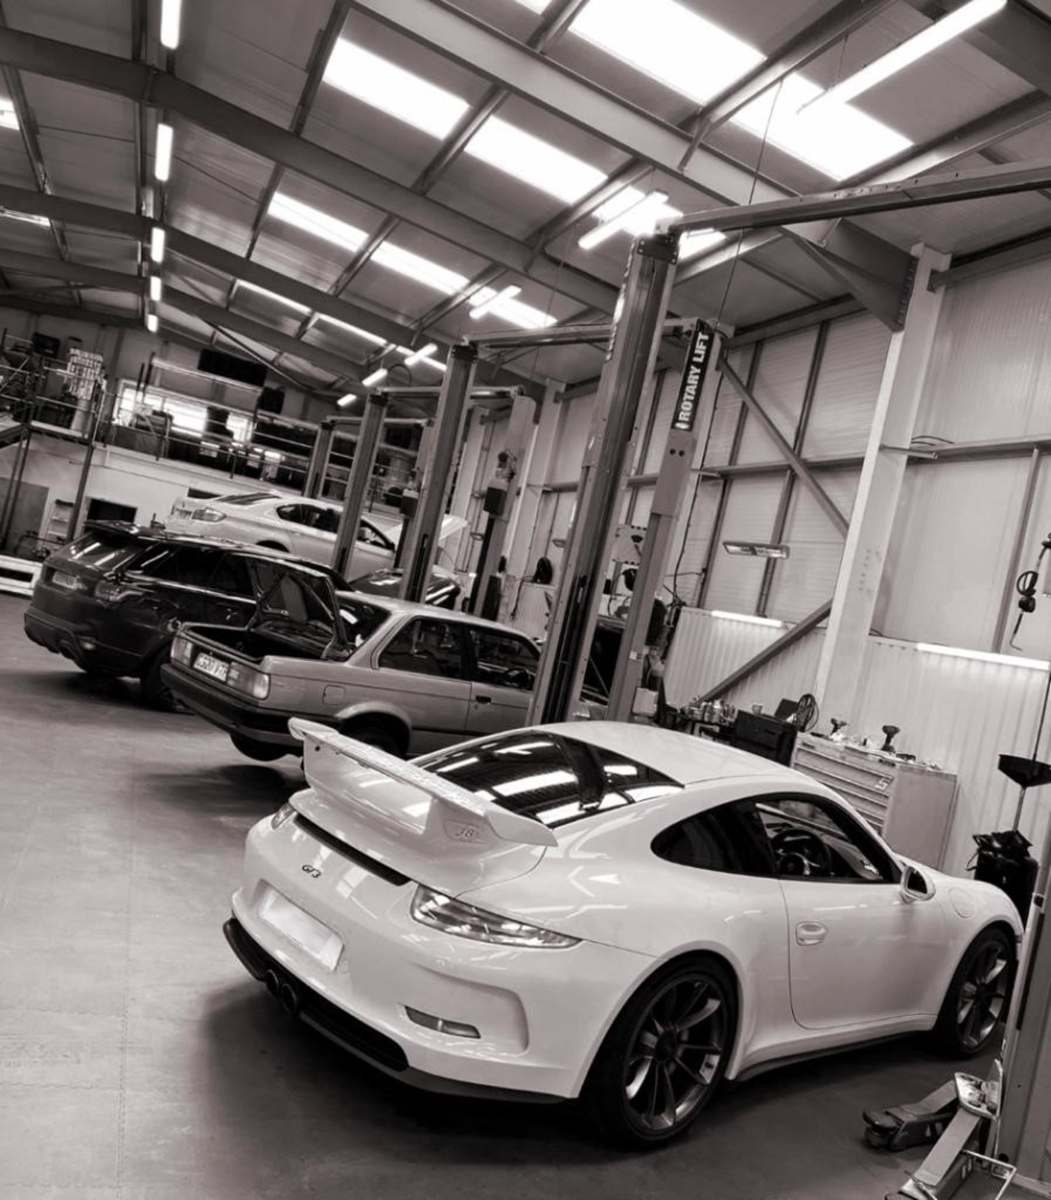 Four cars parked in garage workshop including a Porsche, BMW and Range Rover.